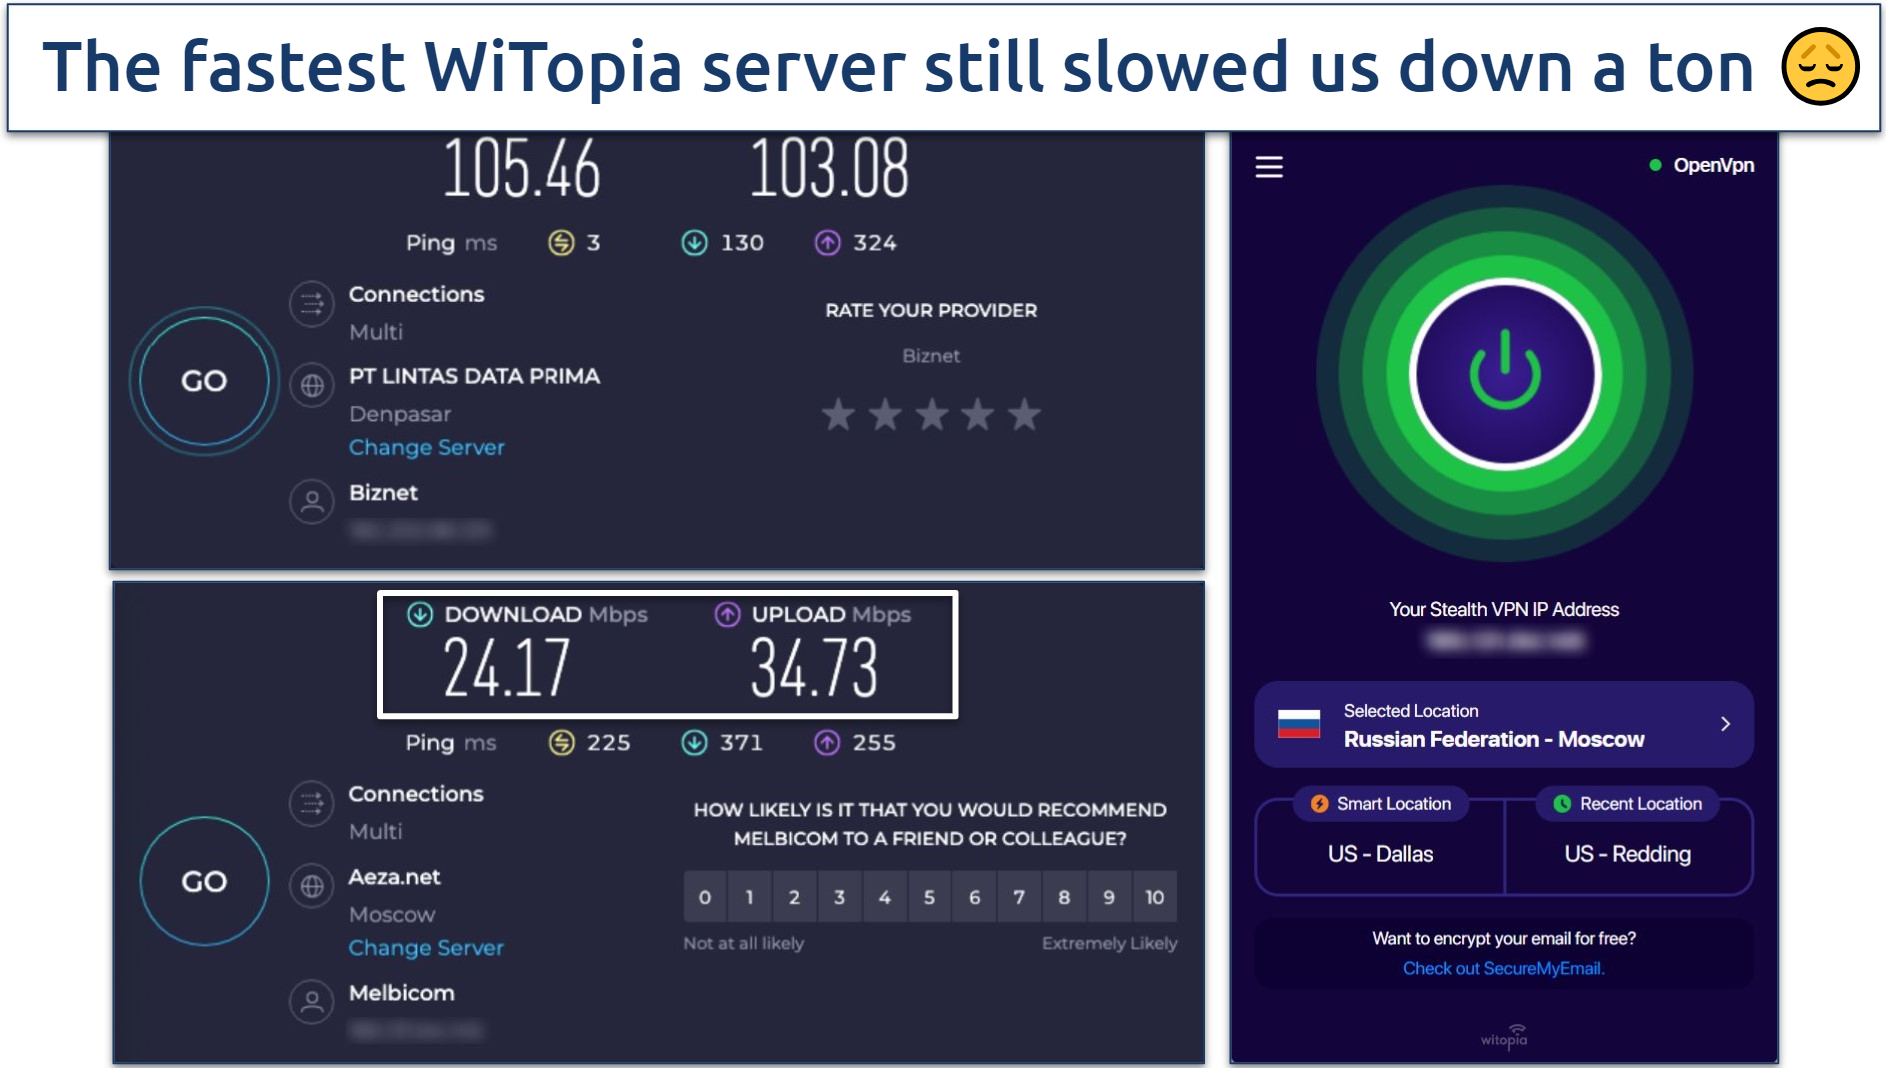 Screenshot of Ookla speed tests done with no VPN connected and while connected to WiTopia's Russia server